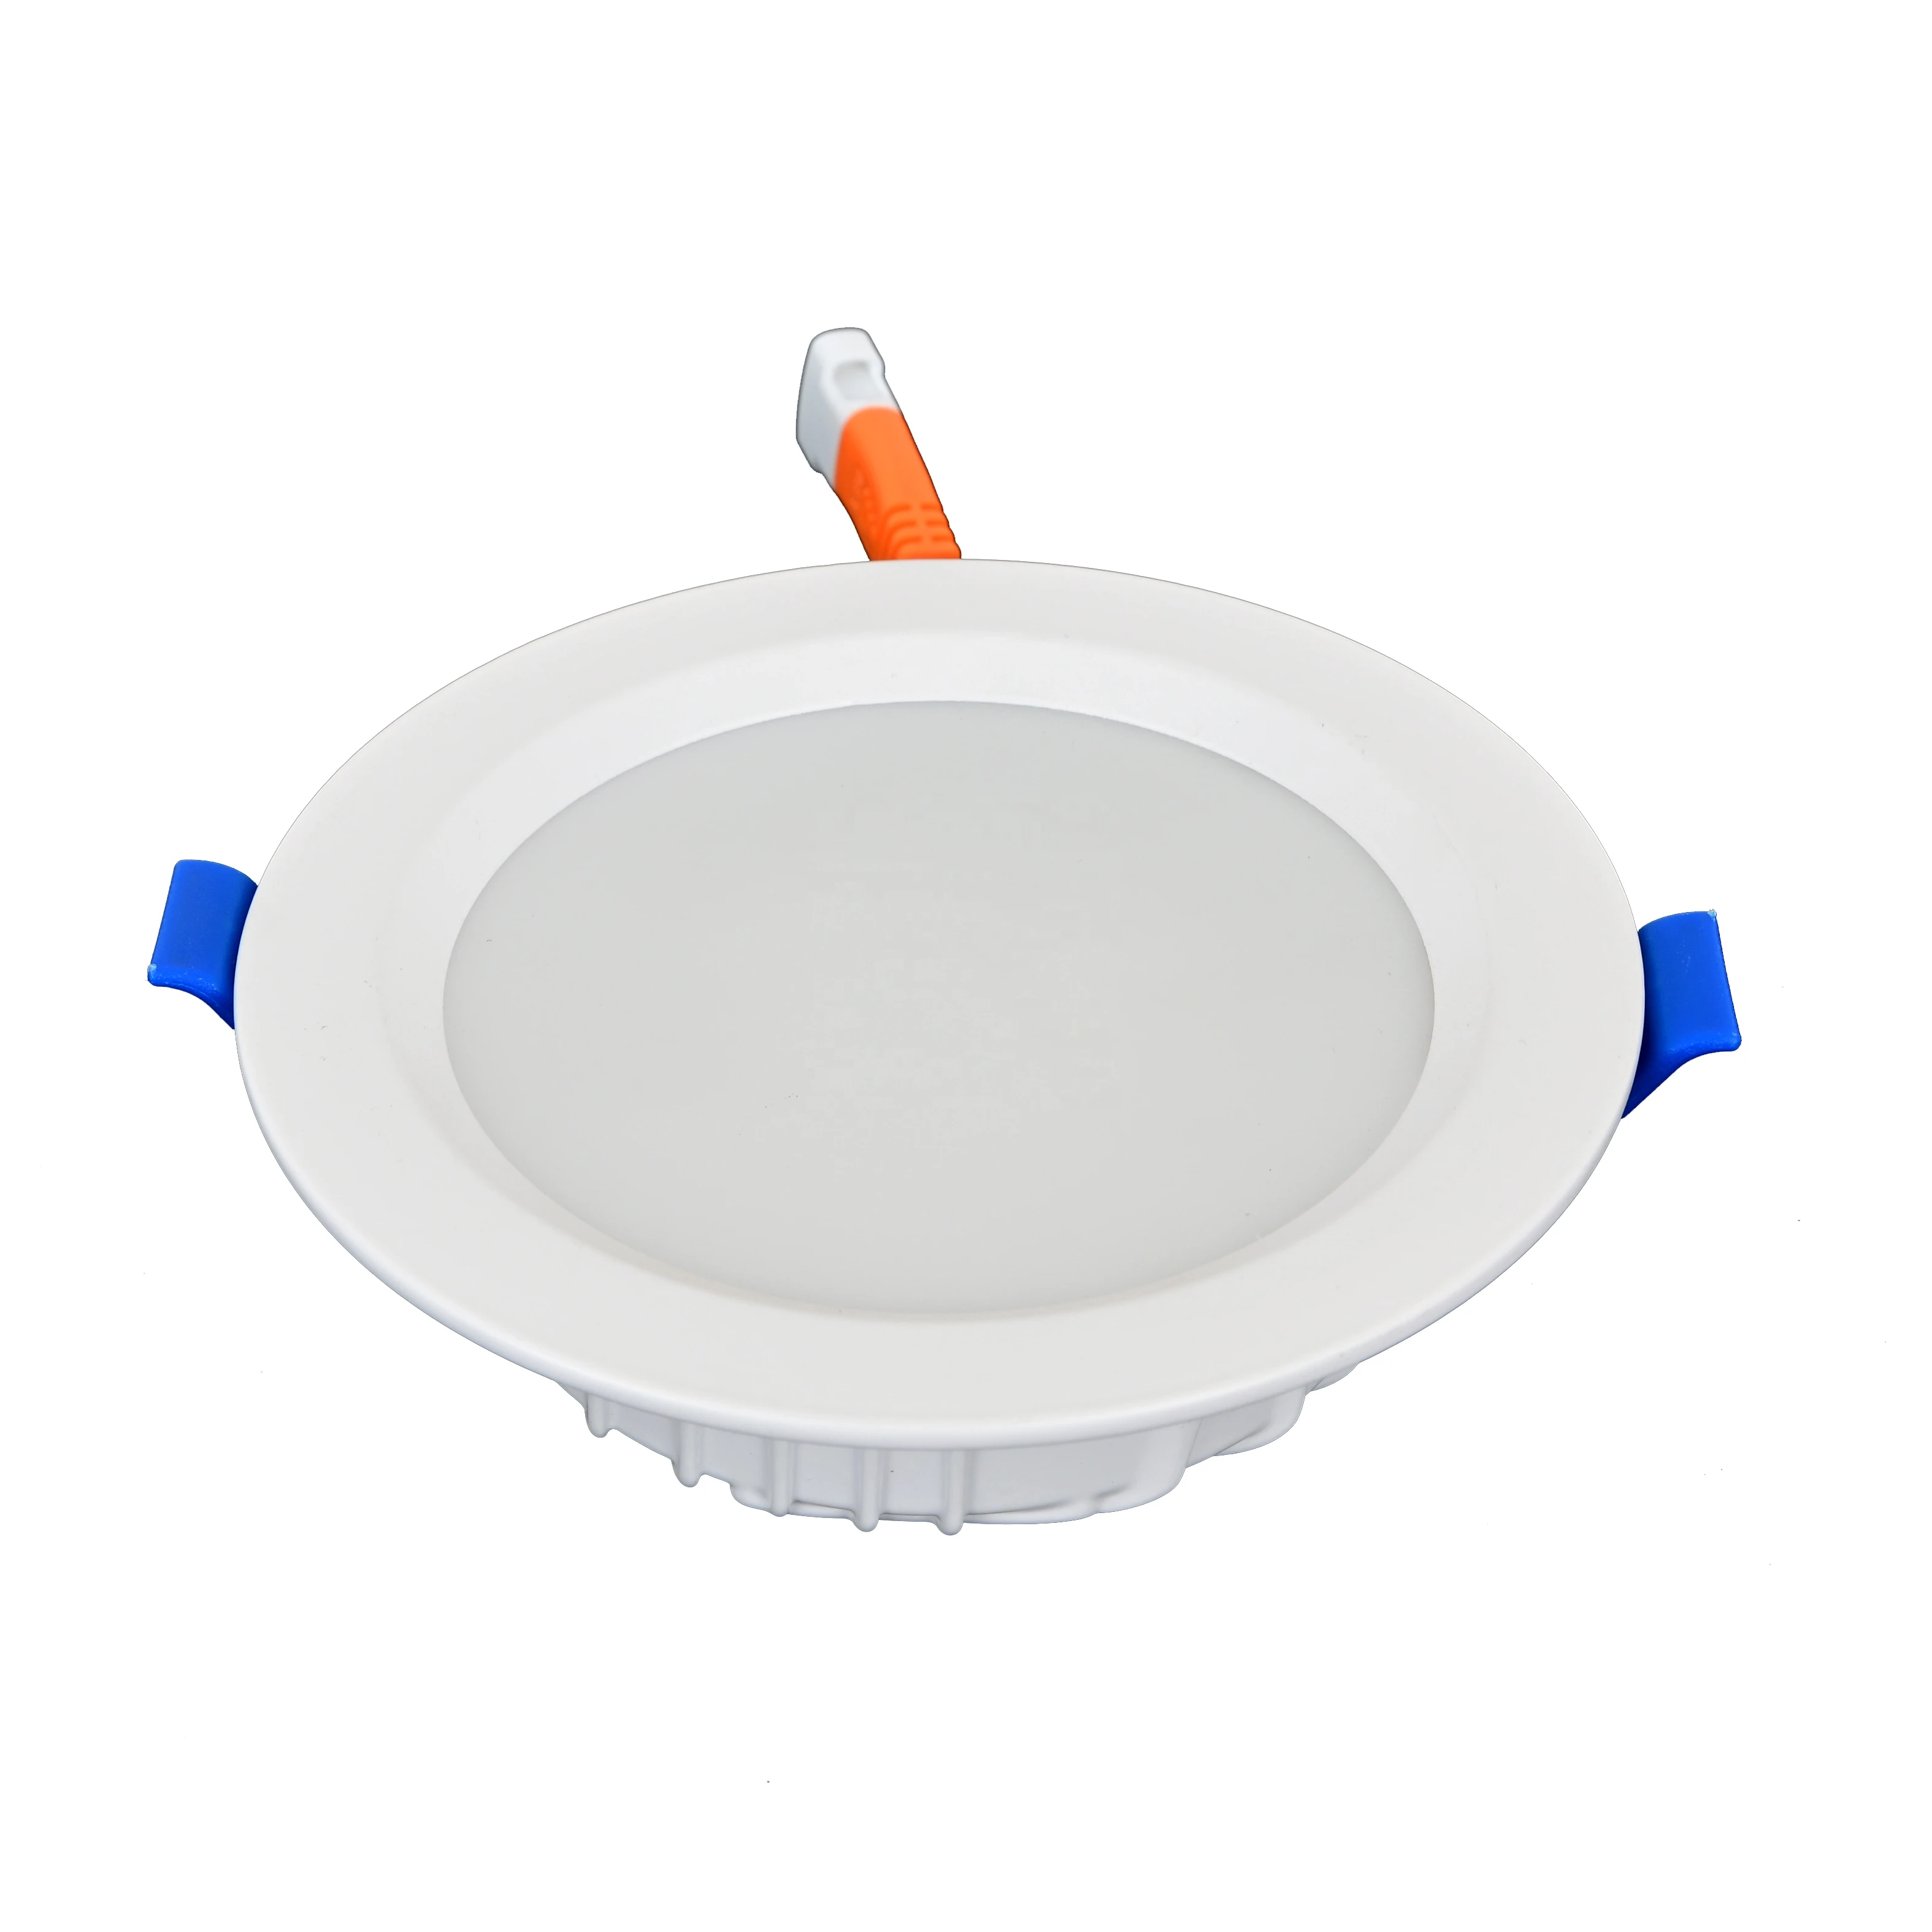 Hot sale down lights led ceiling light downlight in low price